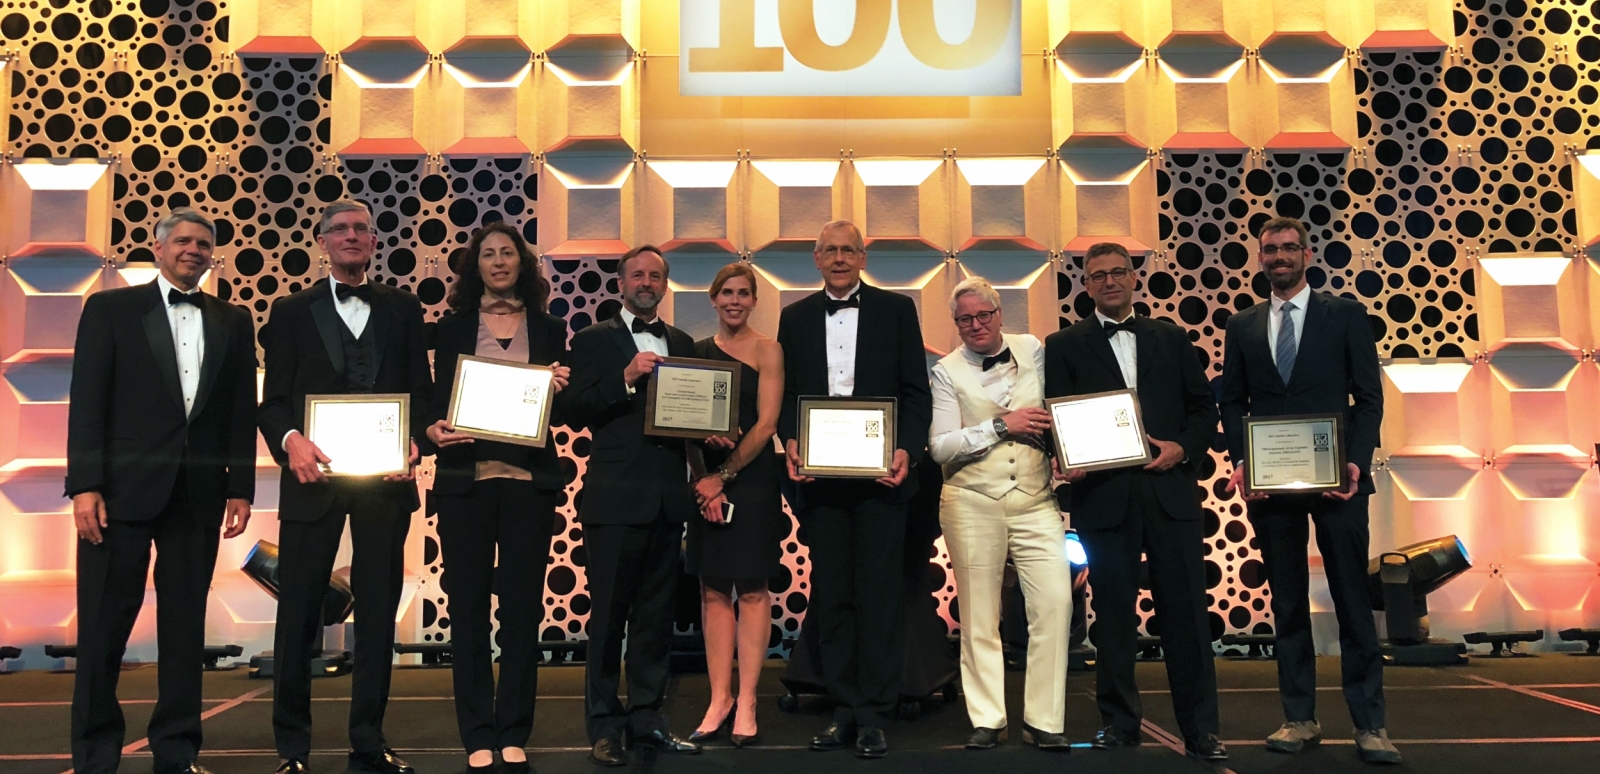 The principal researchers of Lincoln Laboratory’s ten finalists for R&D 100 Awards are seen here with Lincoln Laboratory Director Eric Evans, far left. The principal researchers for the six winning technologies display their award plaques.